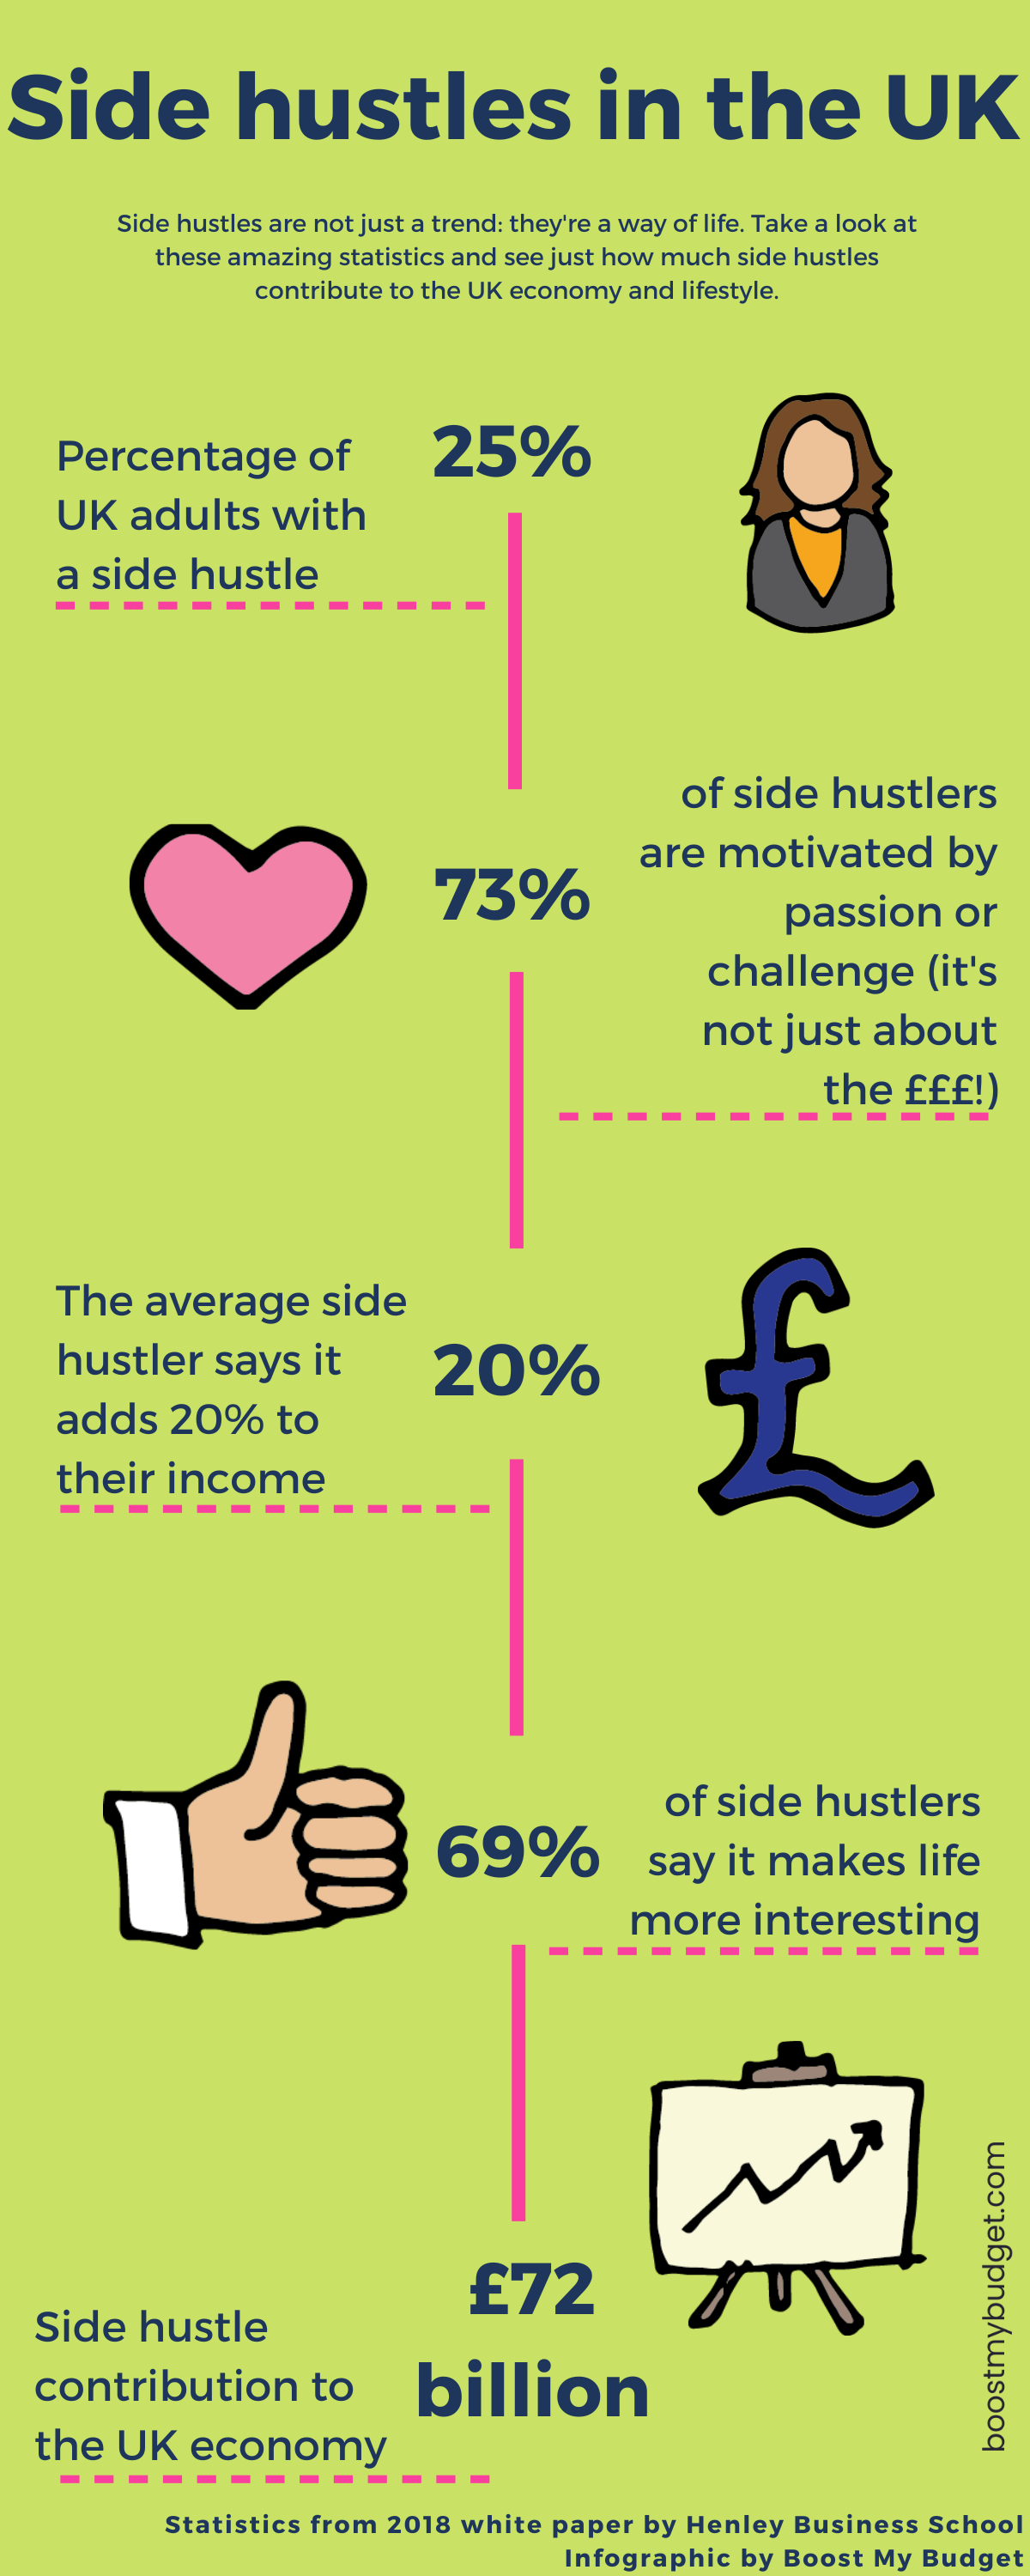 An infographic presenting many statistics about side hustles and the side hustle economy in the UK